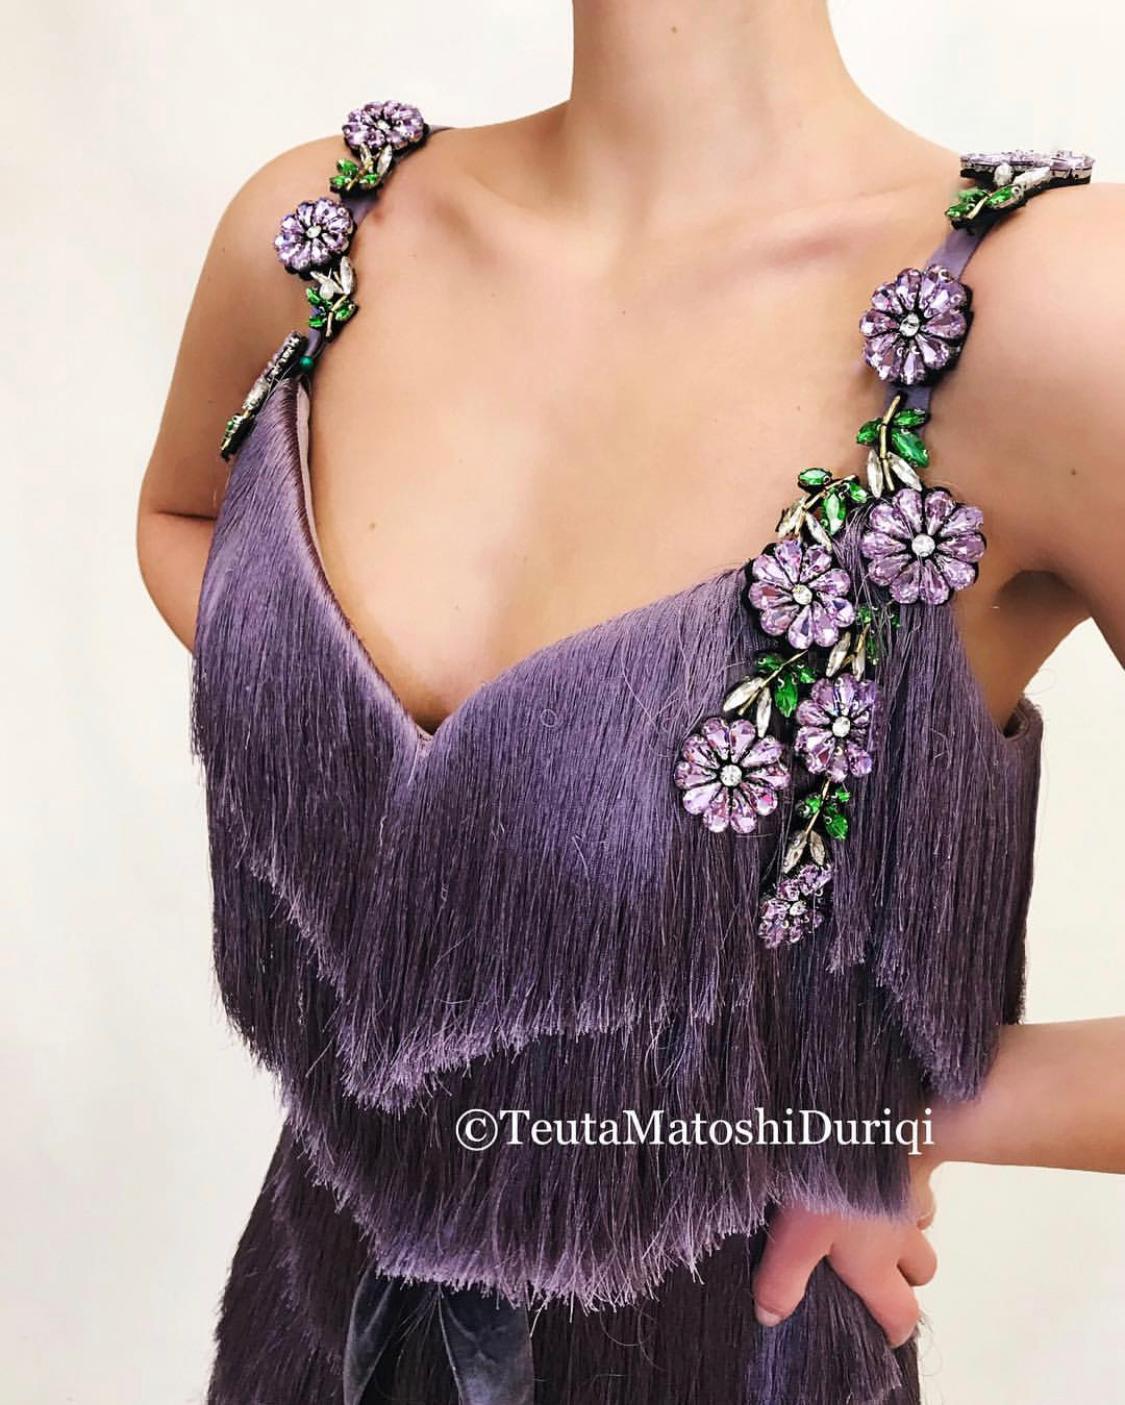 Purple mermaid dress with spaghetti straps, fringe and embroidery